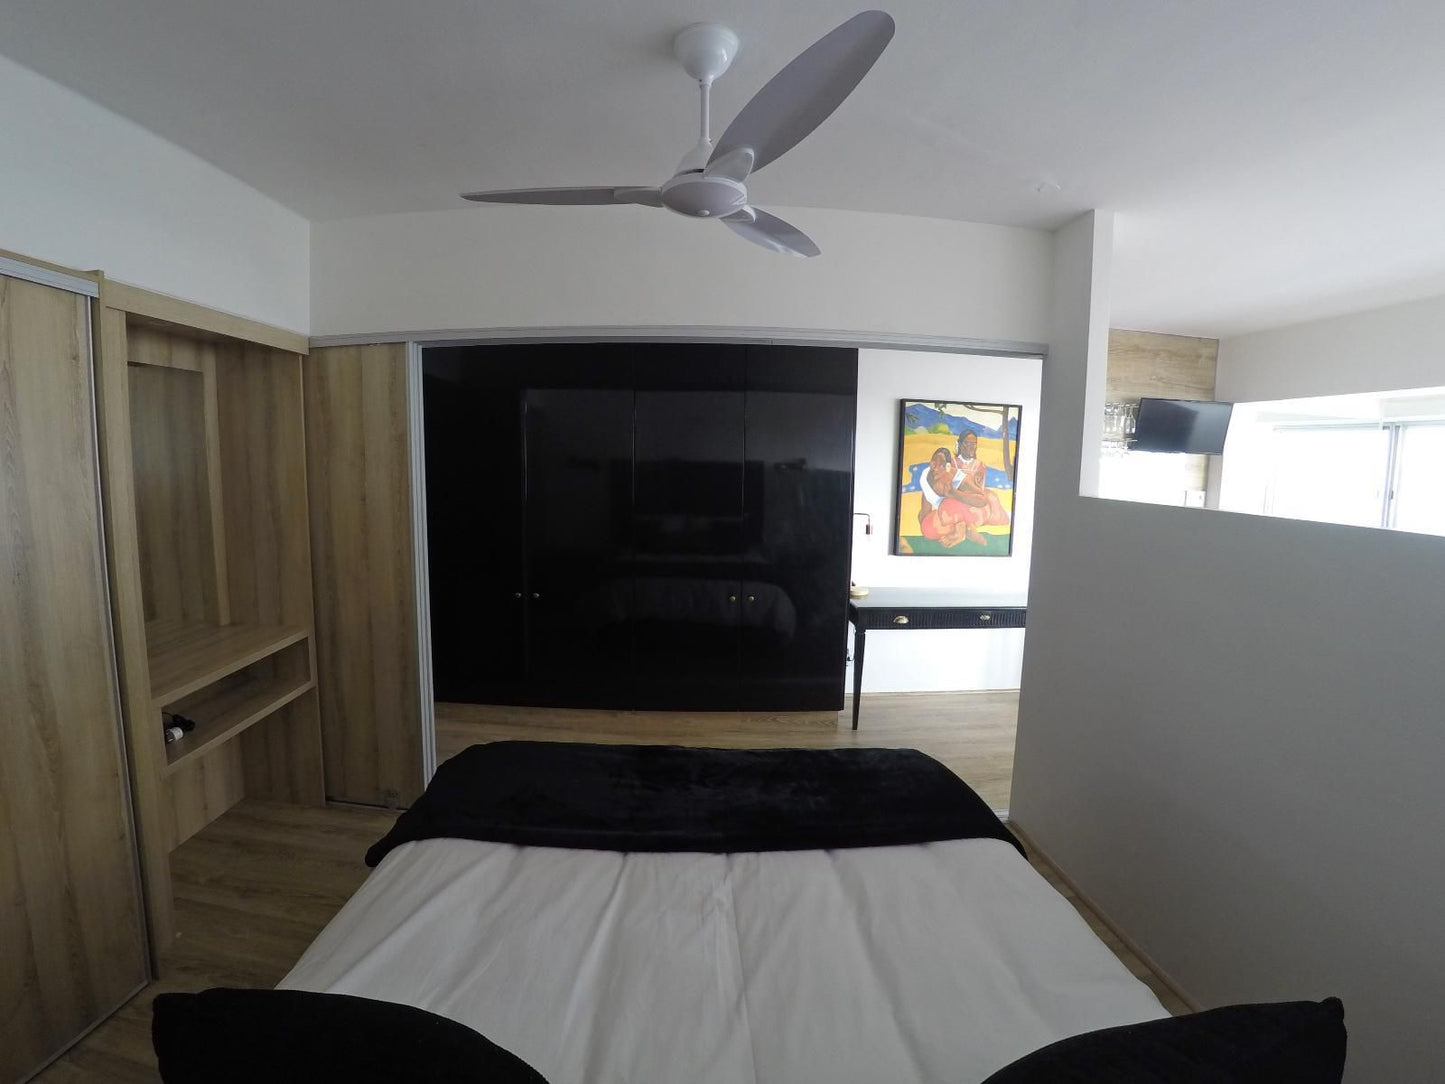 205 New Cumberland Mouille Point Cape Town Western Cape South Africa Unsaturated, Bedroom